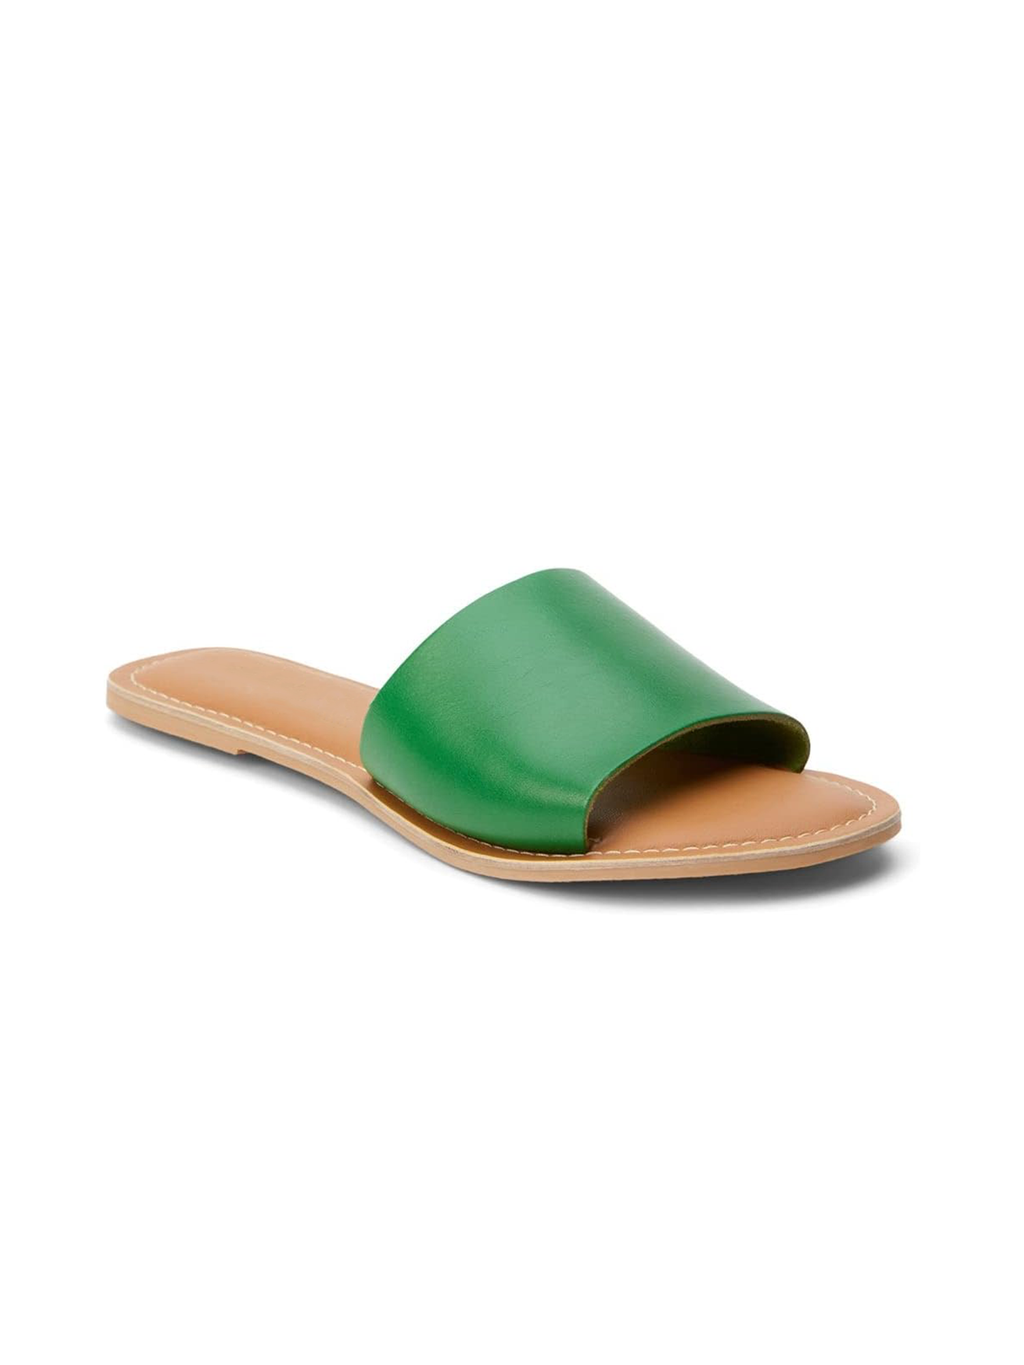 Cabana Slides in Green Leather